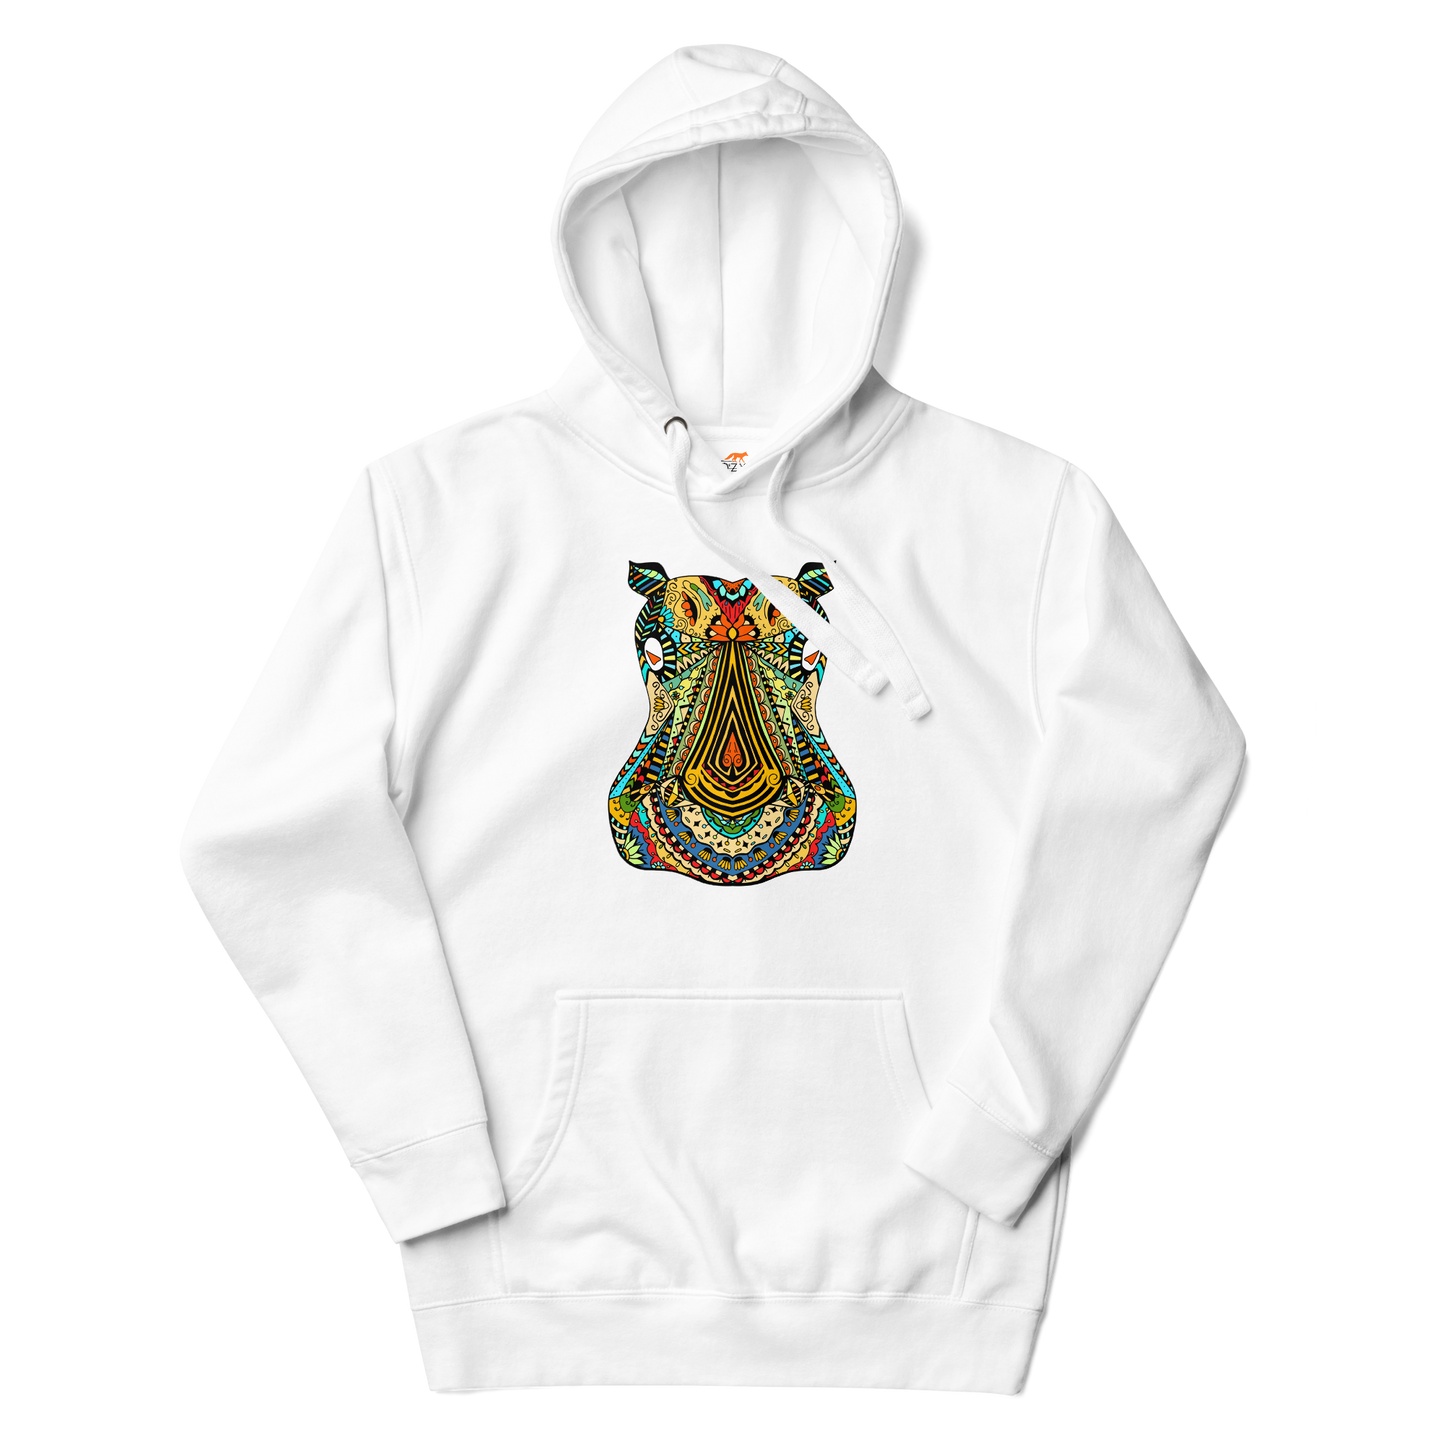 White Premium Hippo Hoodie featuring a vibrant Zentangle Hippo graphic on the chest - Cool Graphic Hippo Hoodies - Boozy Fox